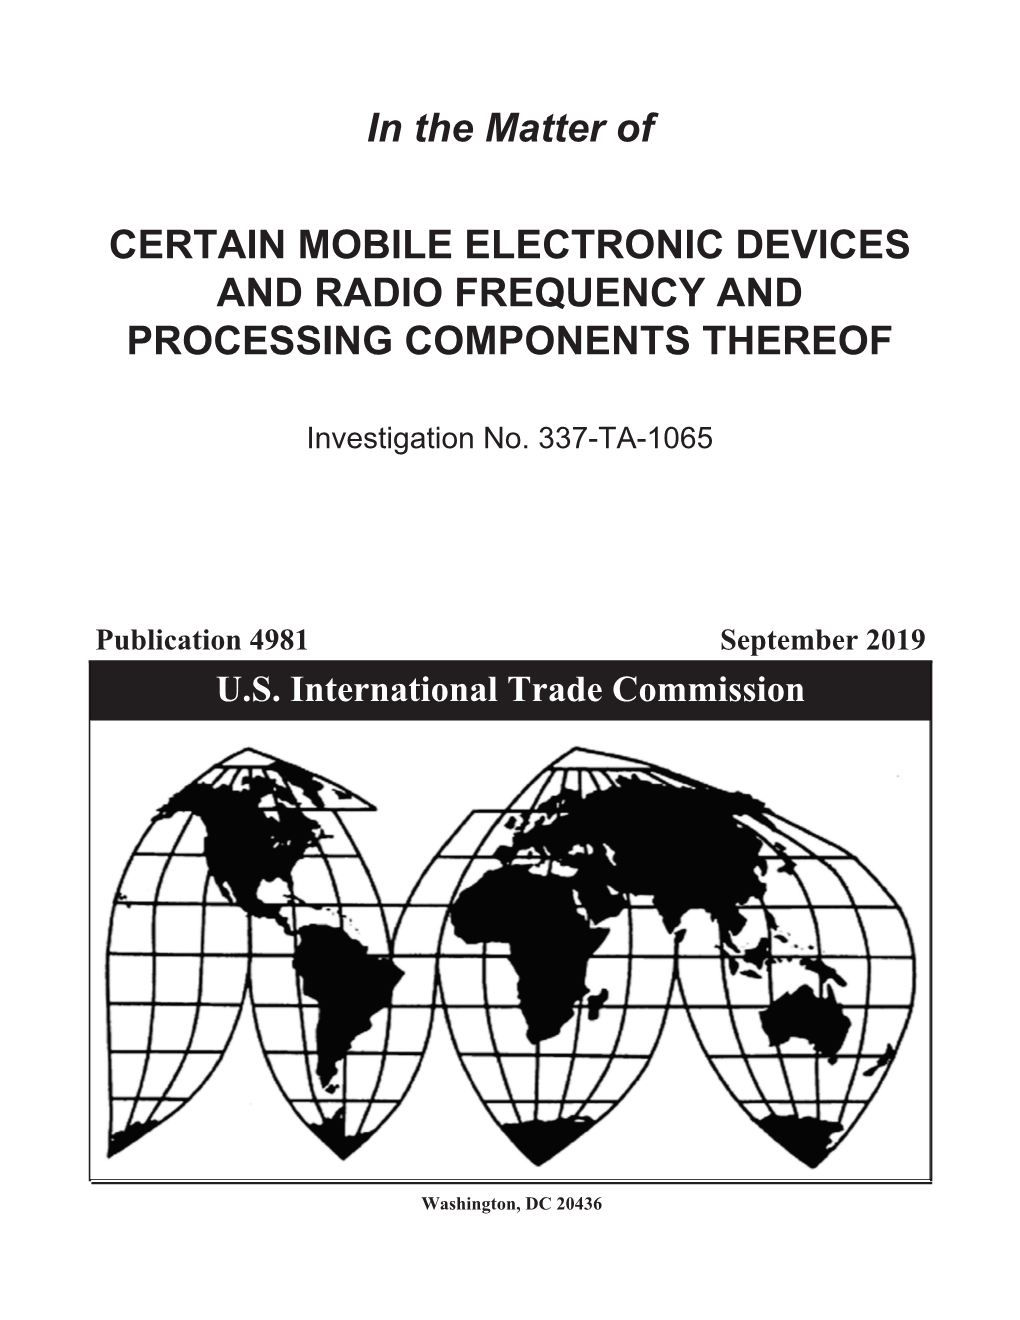 Certain Mobile Electronic Devices and Radio Frequency and Processing Components Thereof